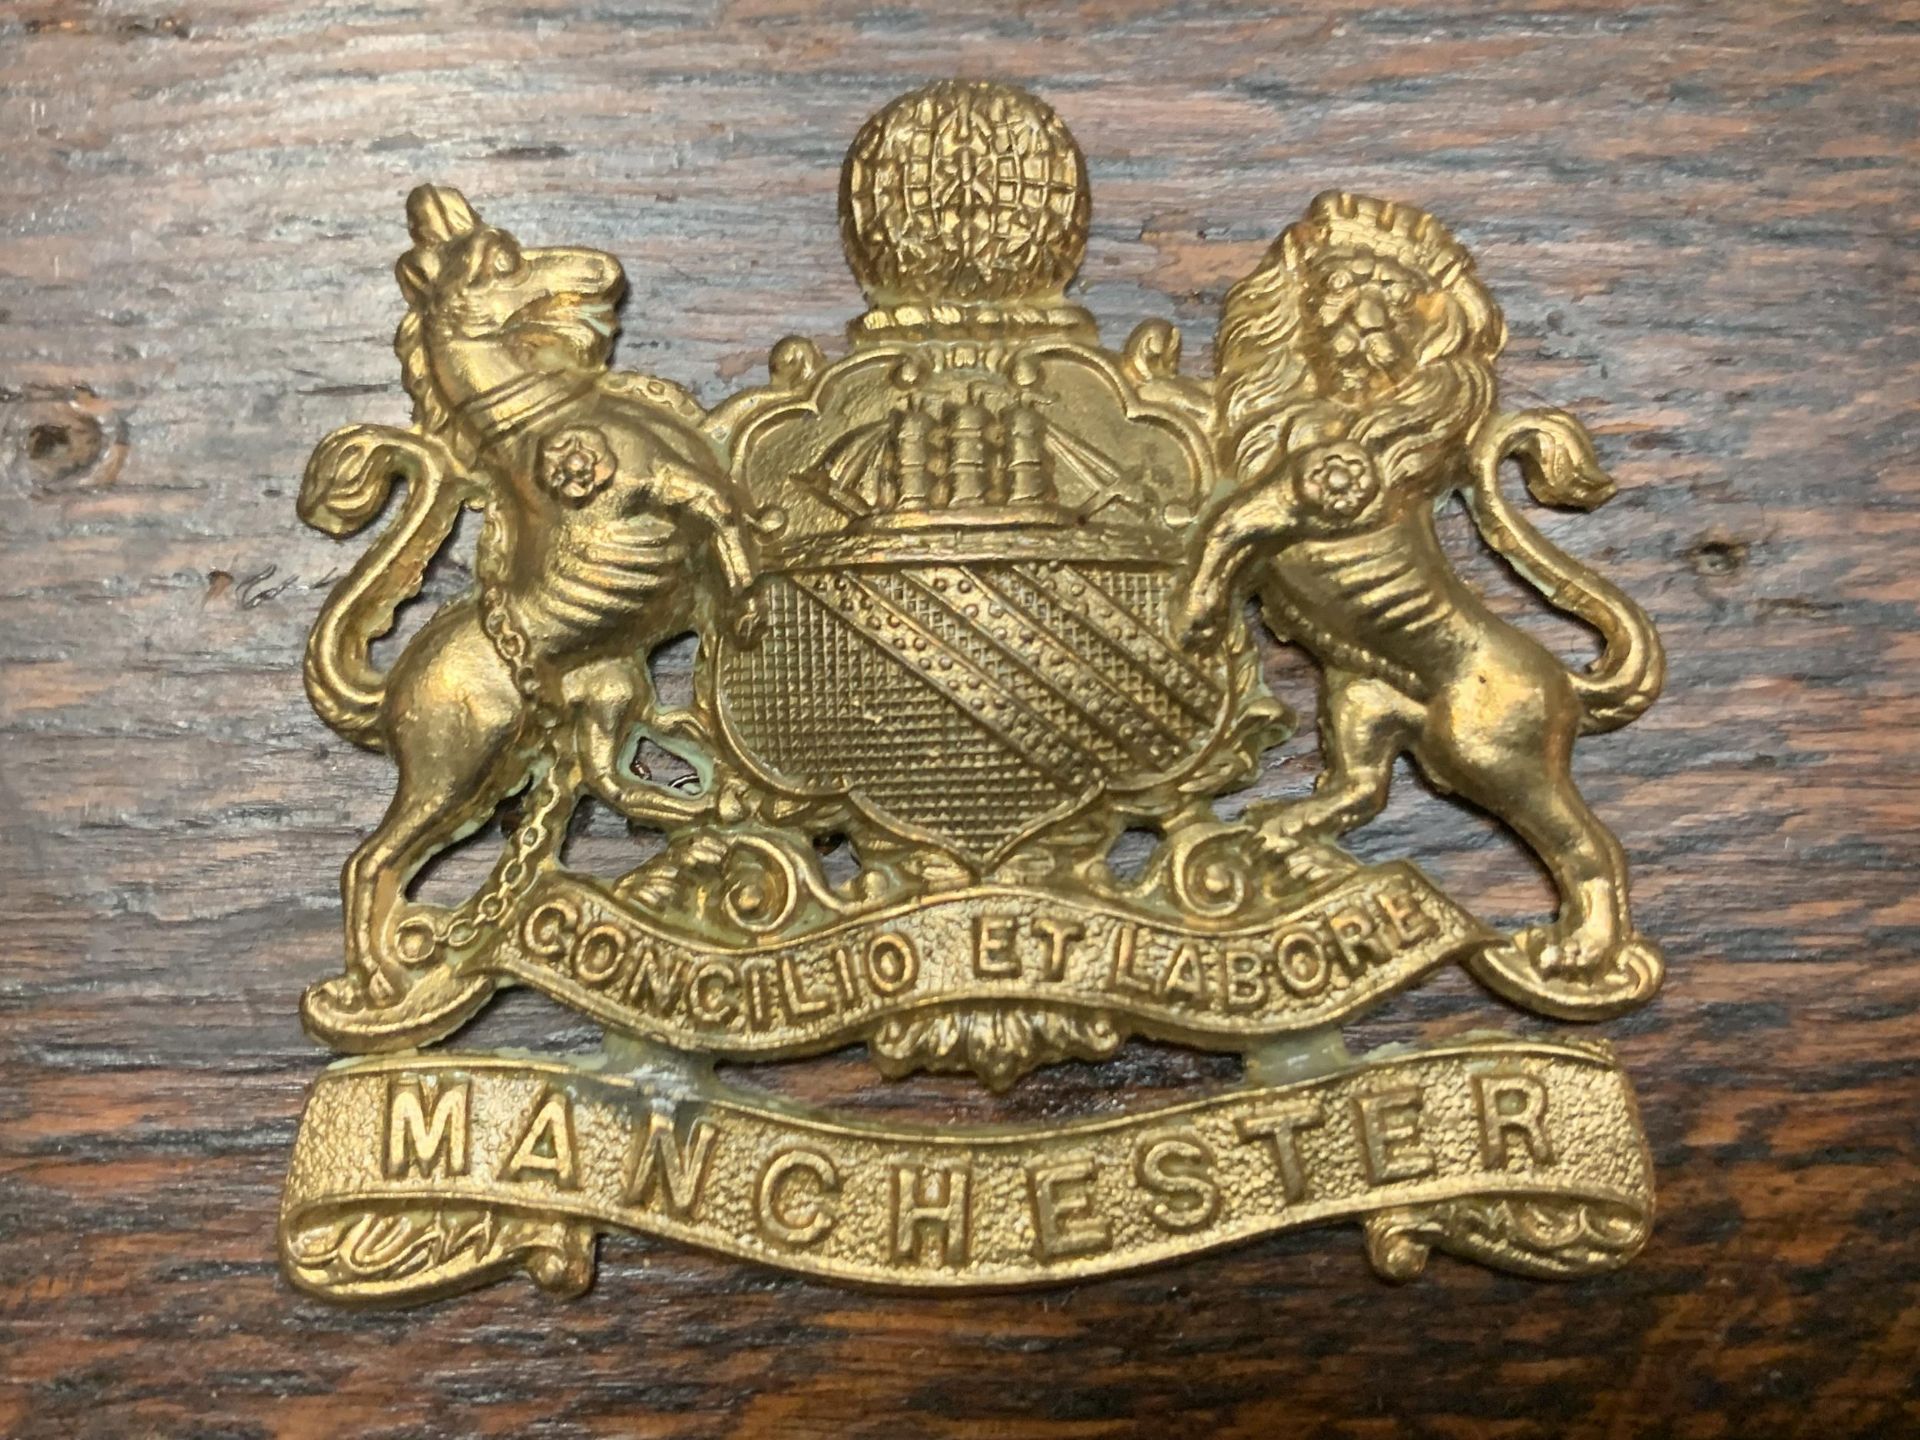 AN ORNATE WOODEN BOX WITH THE MANCHESTER COAT OF ARMS TO THE LID IN YELLOW METAL AND A FURTHER WHEAT - Image 4 of 5